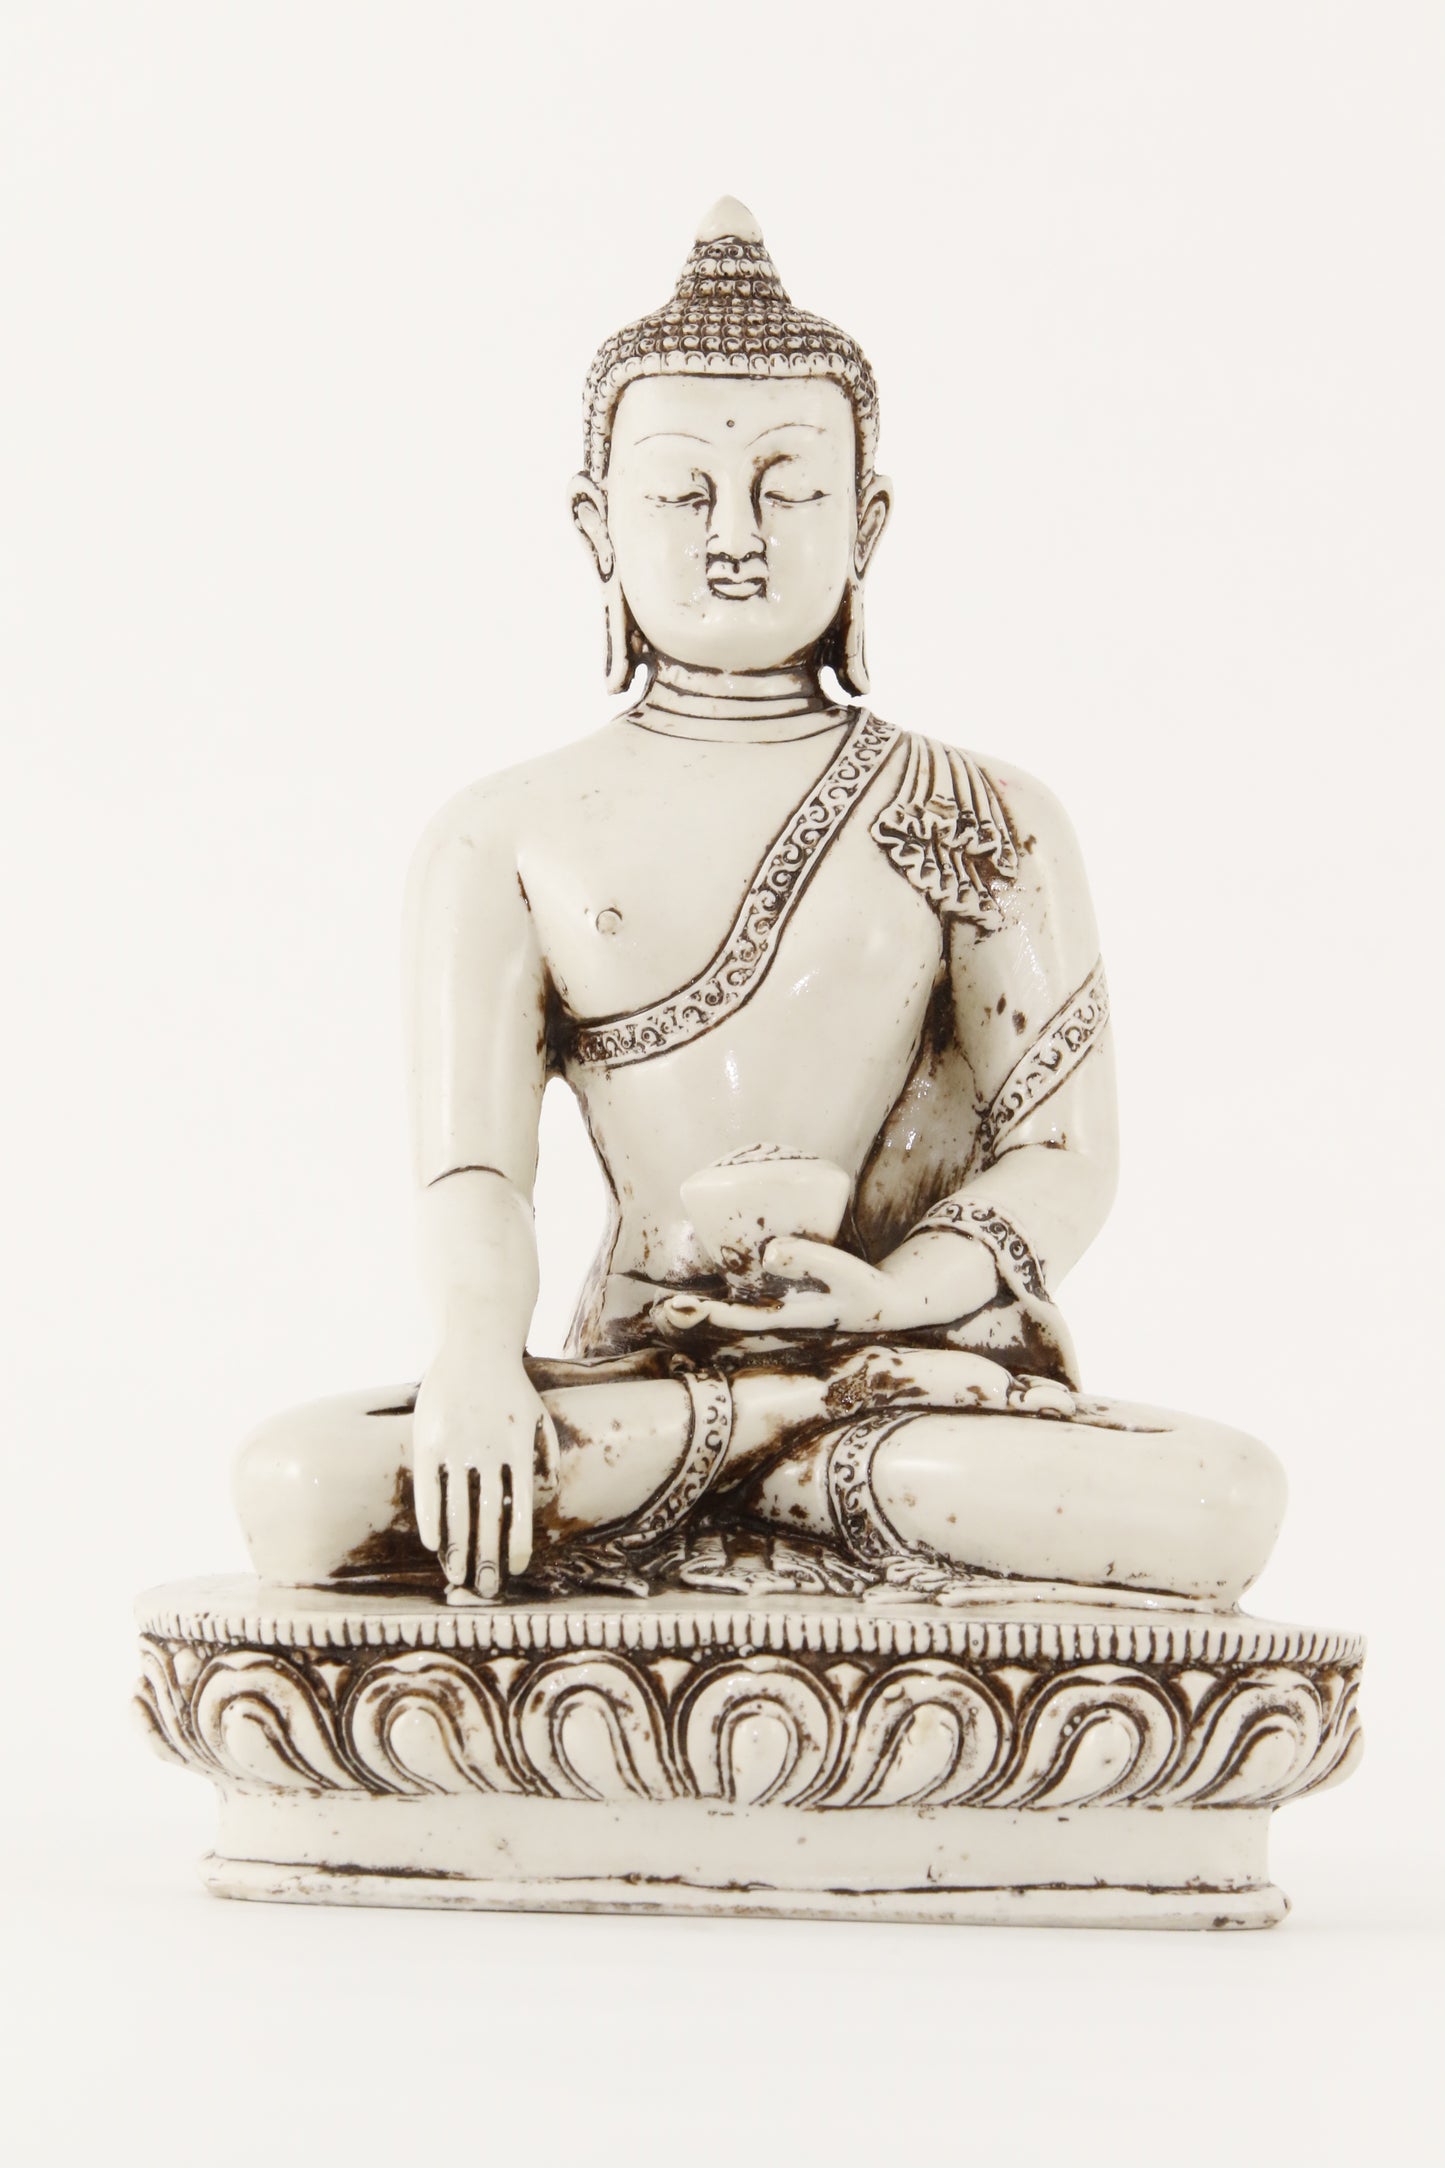 EARTH TOUCHING BUDDHA STATUE OFF-WHITE LARGE FRONT VIEW